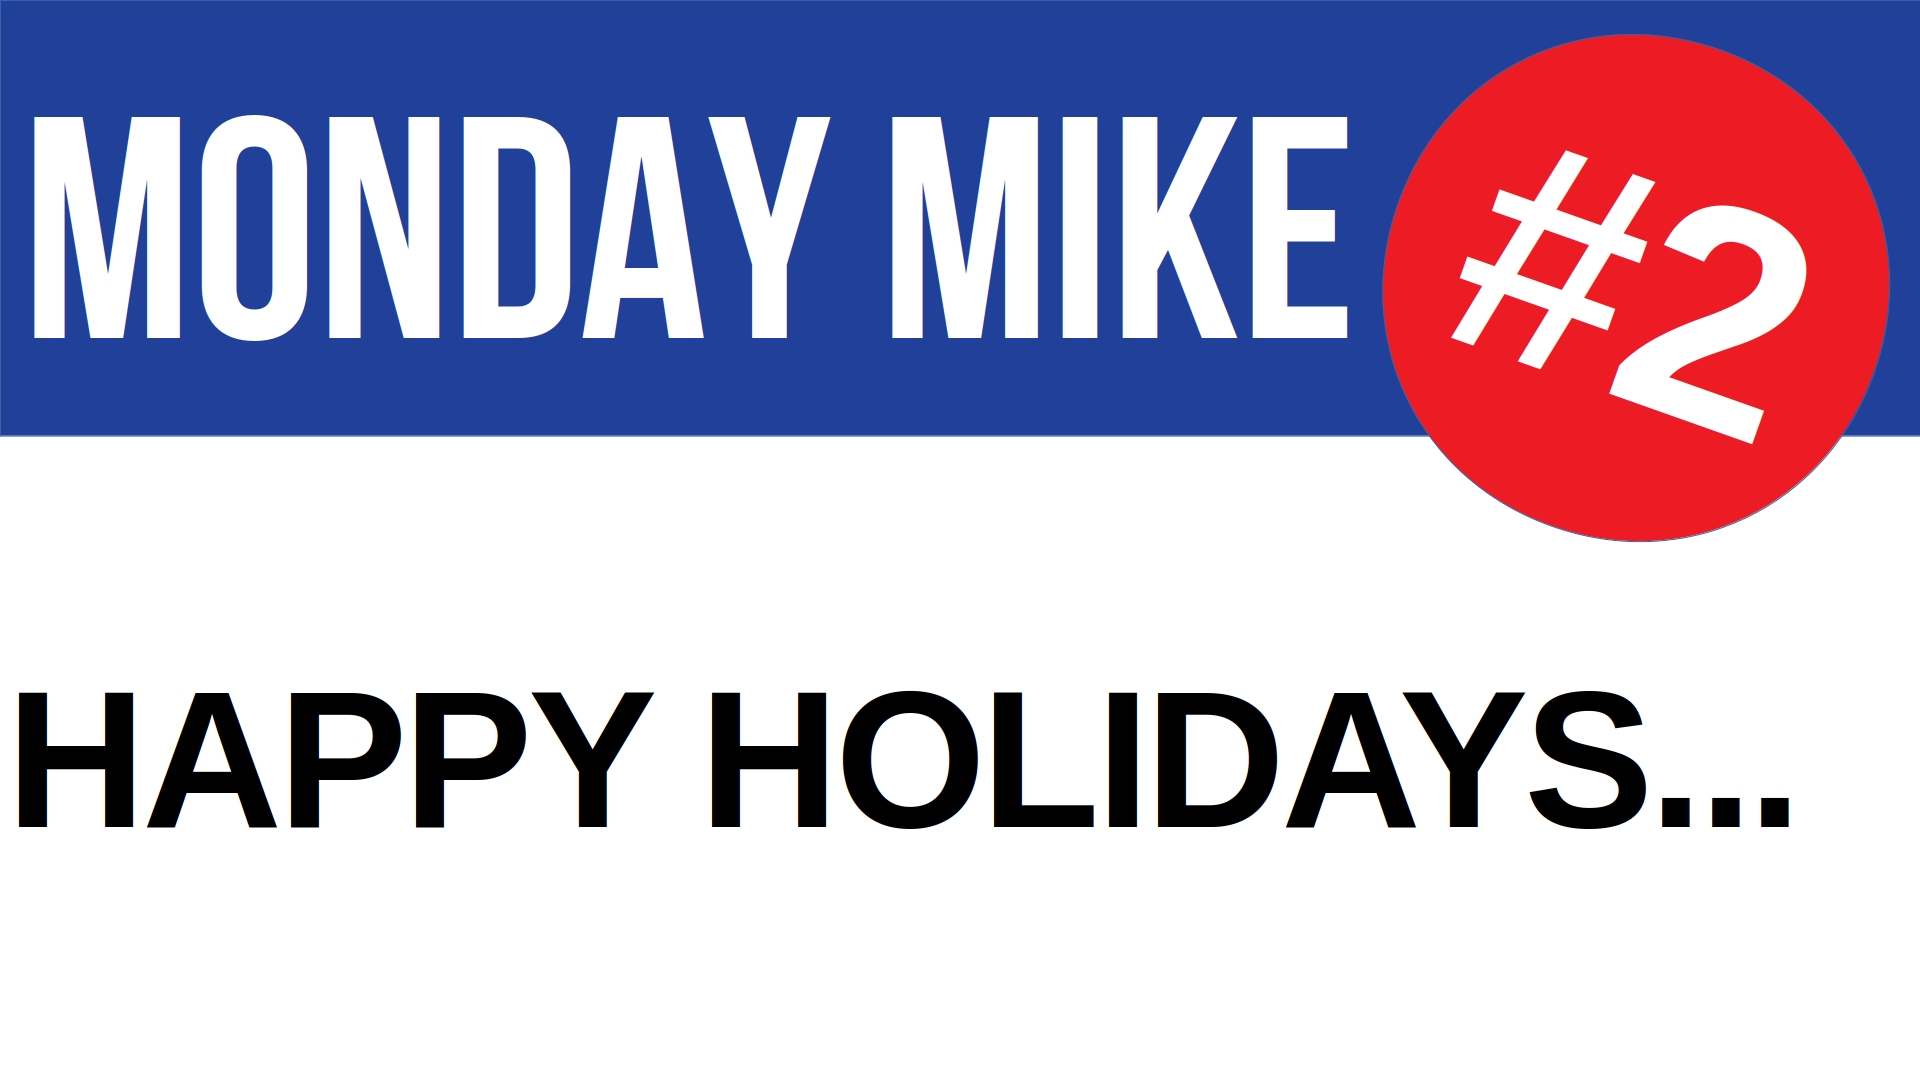 Monday Mike 2: Happy Holidays